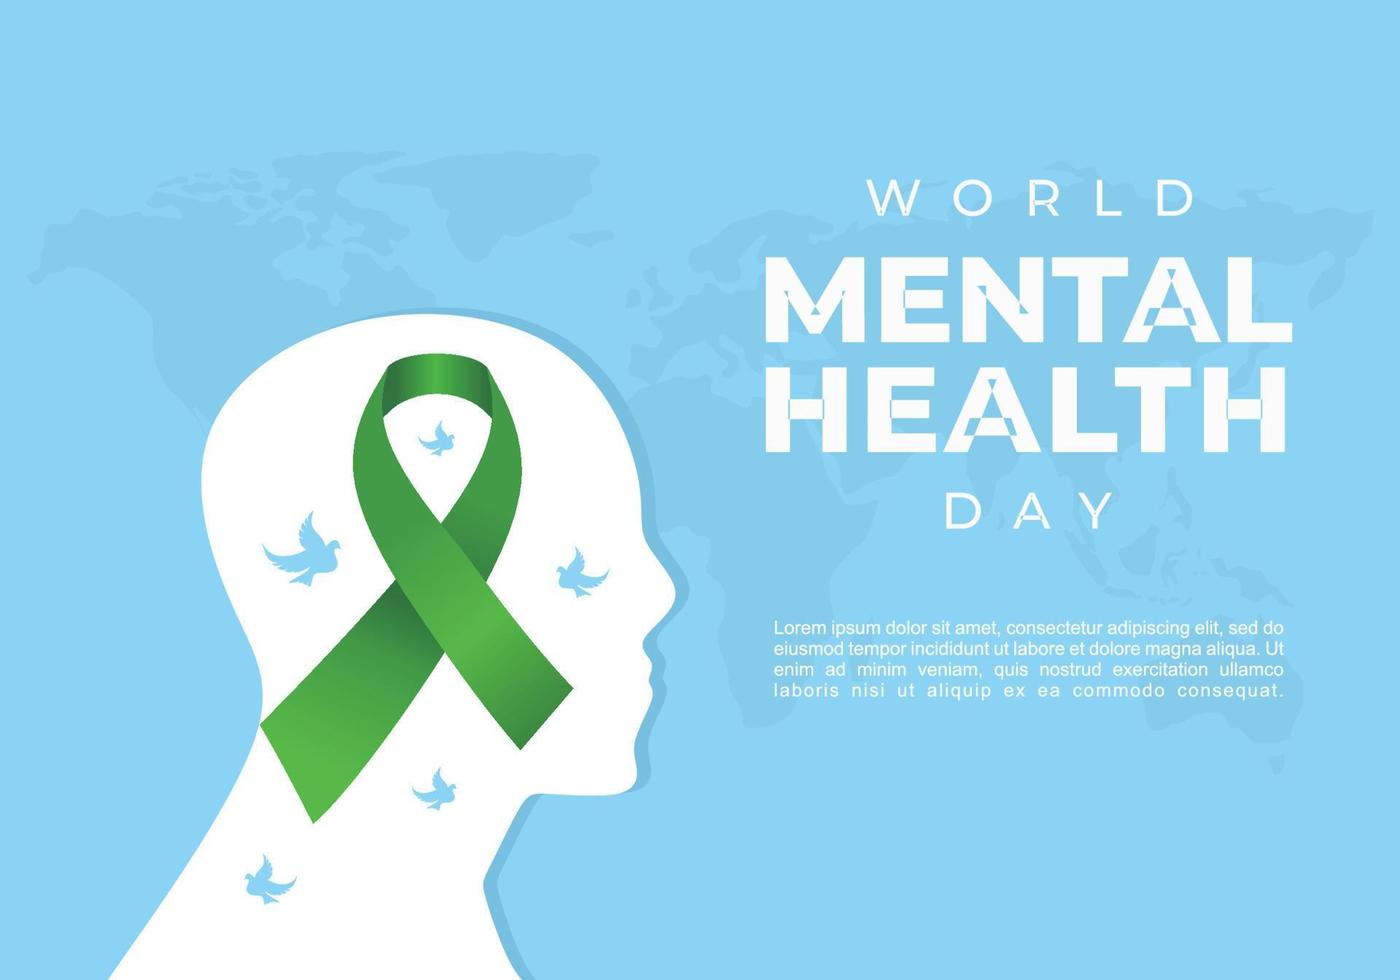 World mental health day background celebrated on october 10th. vector